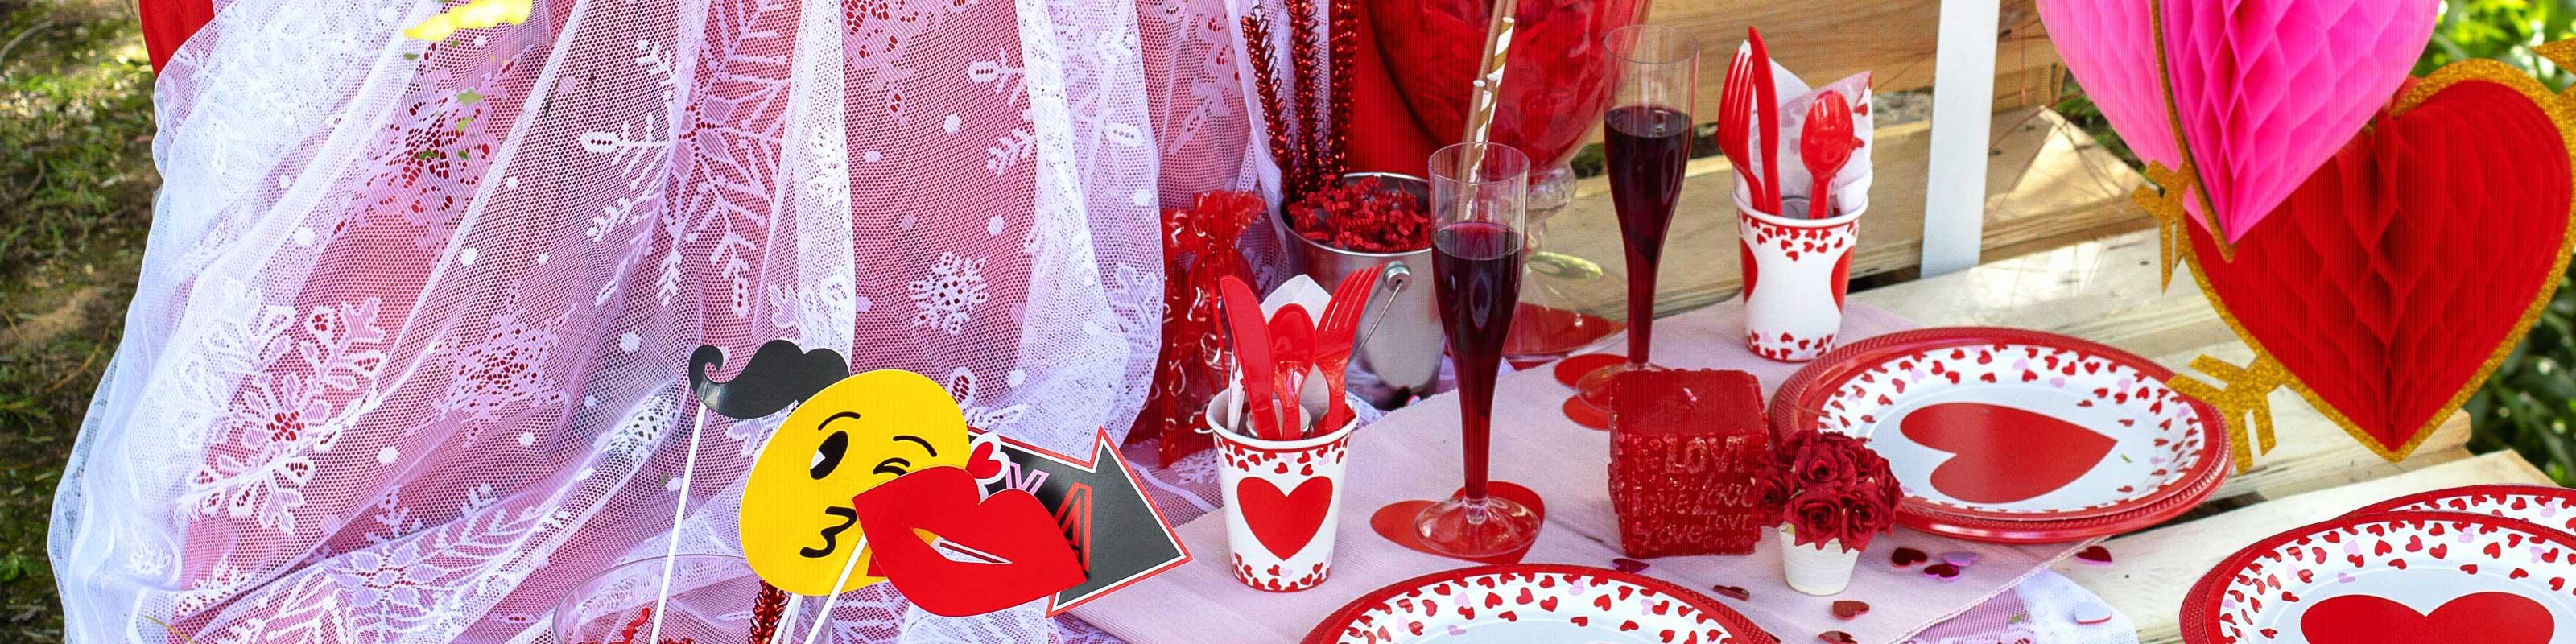 Valentine’s Day In The UAE: The Party Supplies You Will Need To Celebrate - MyPartyCentre